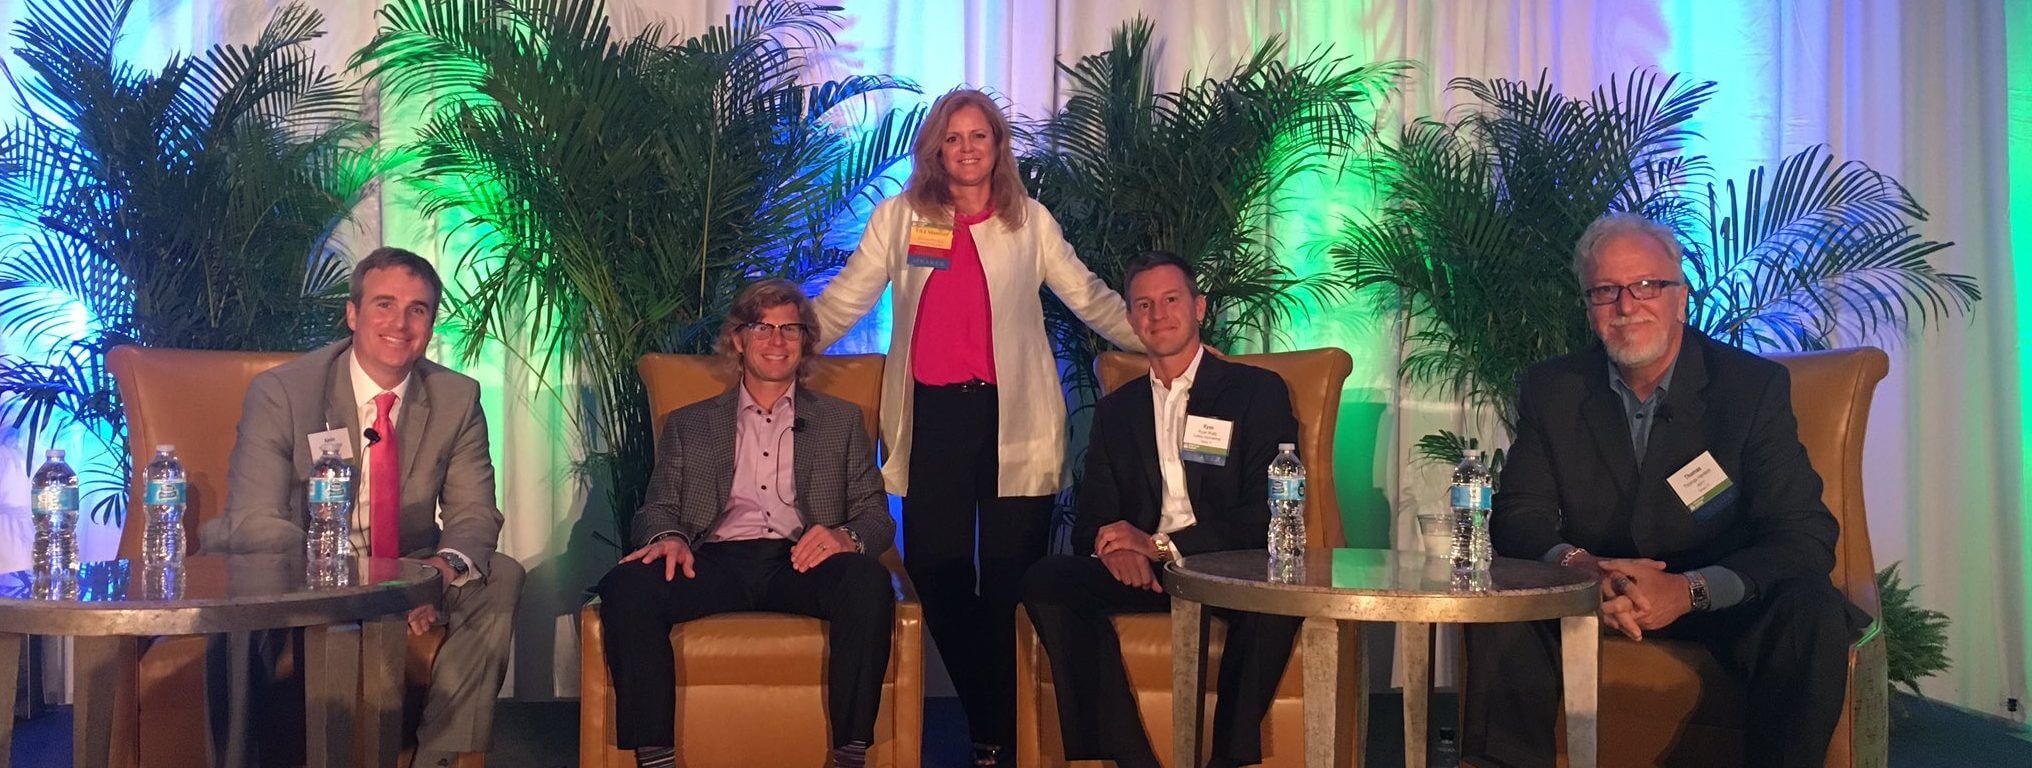 3 highlights from this year’s ULI Florida Summit